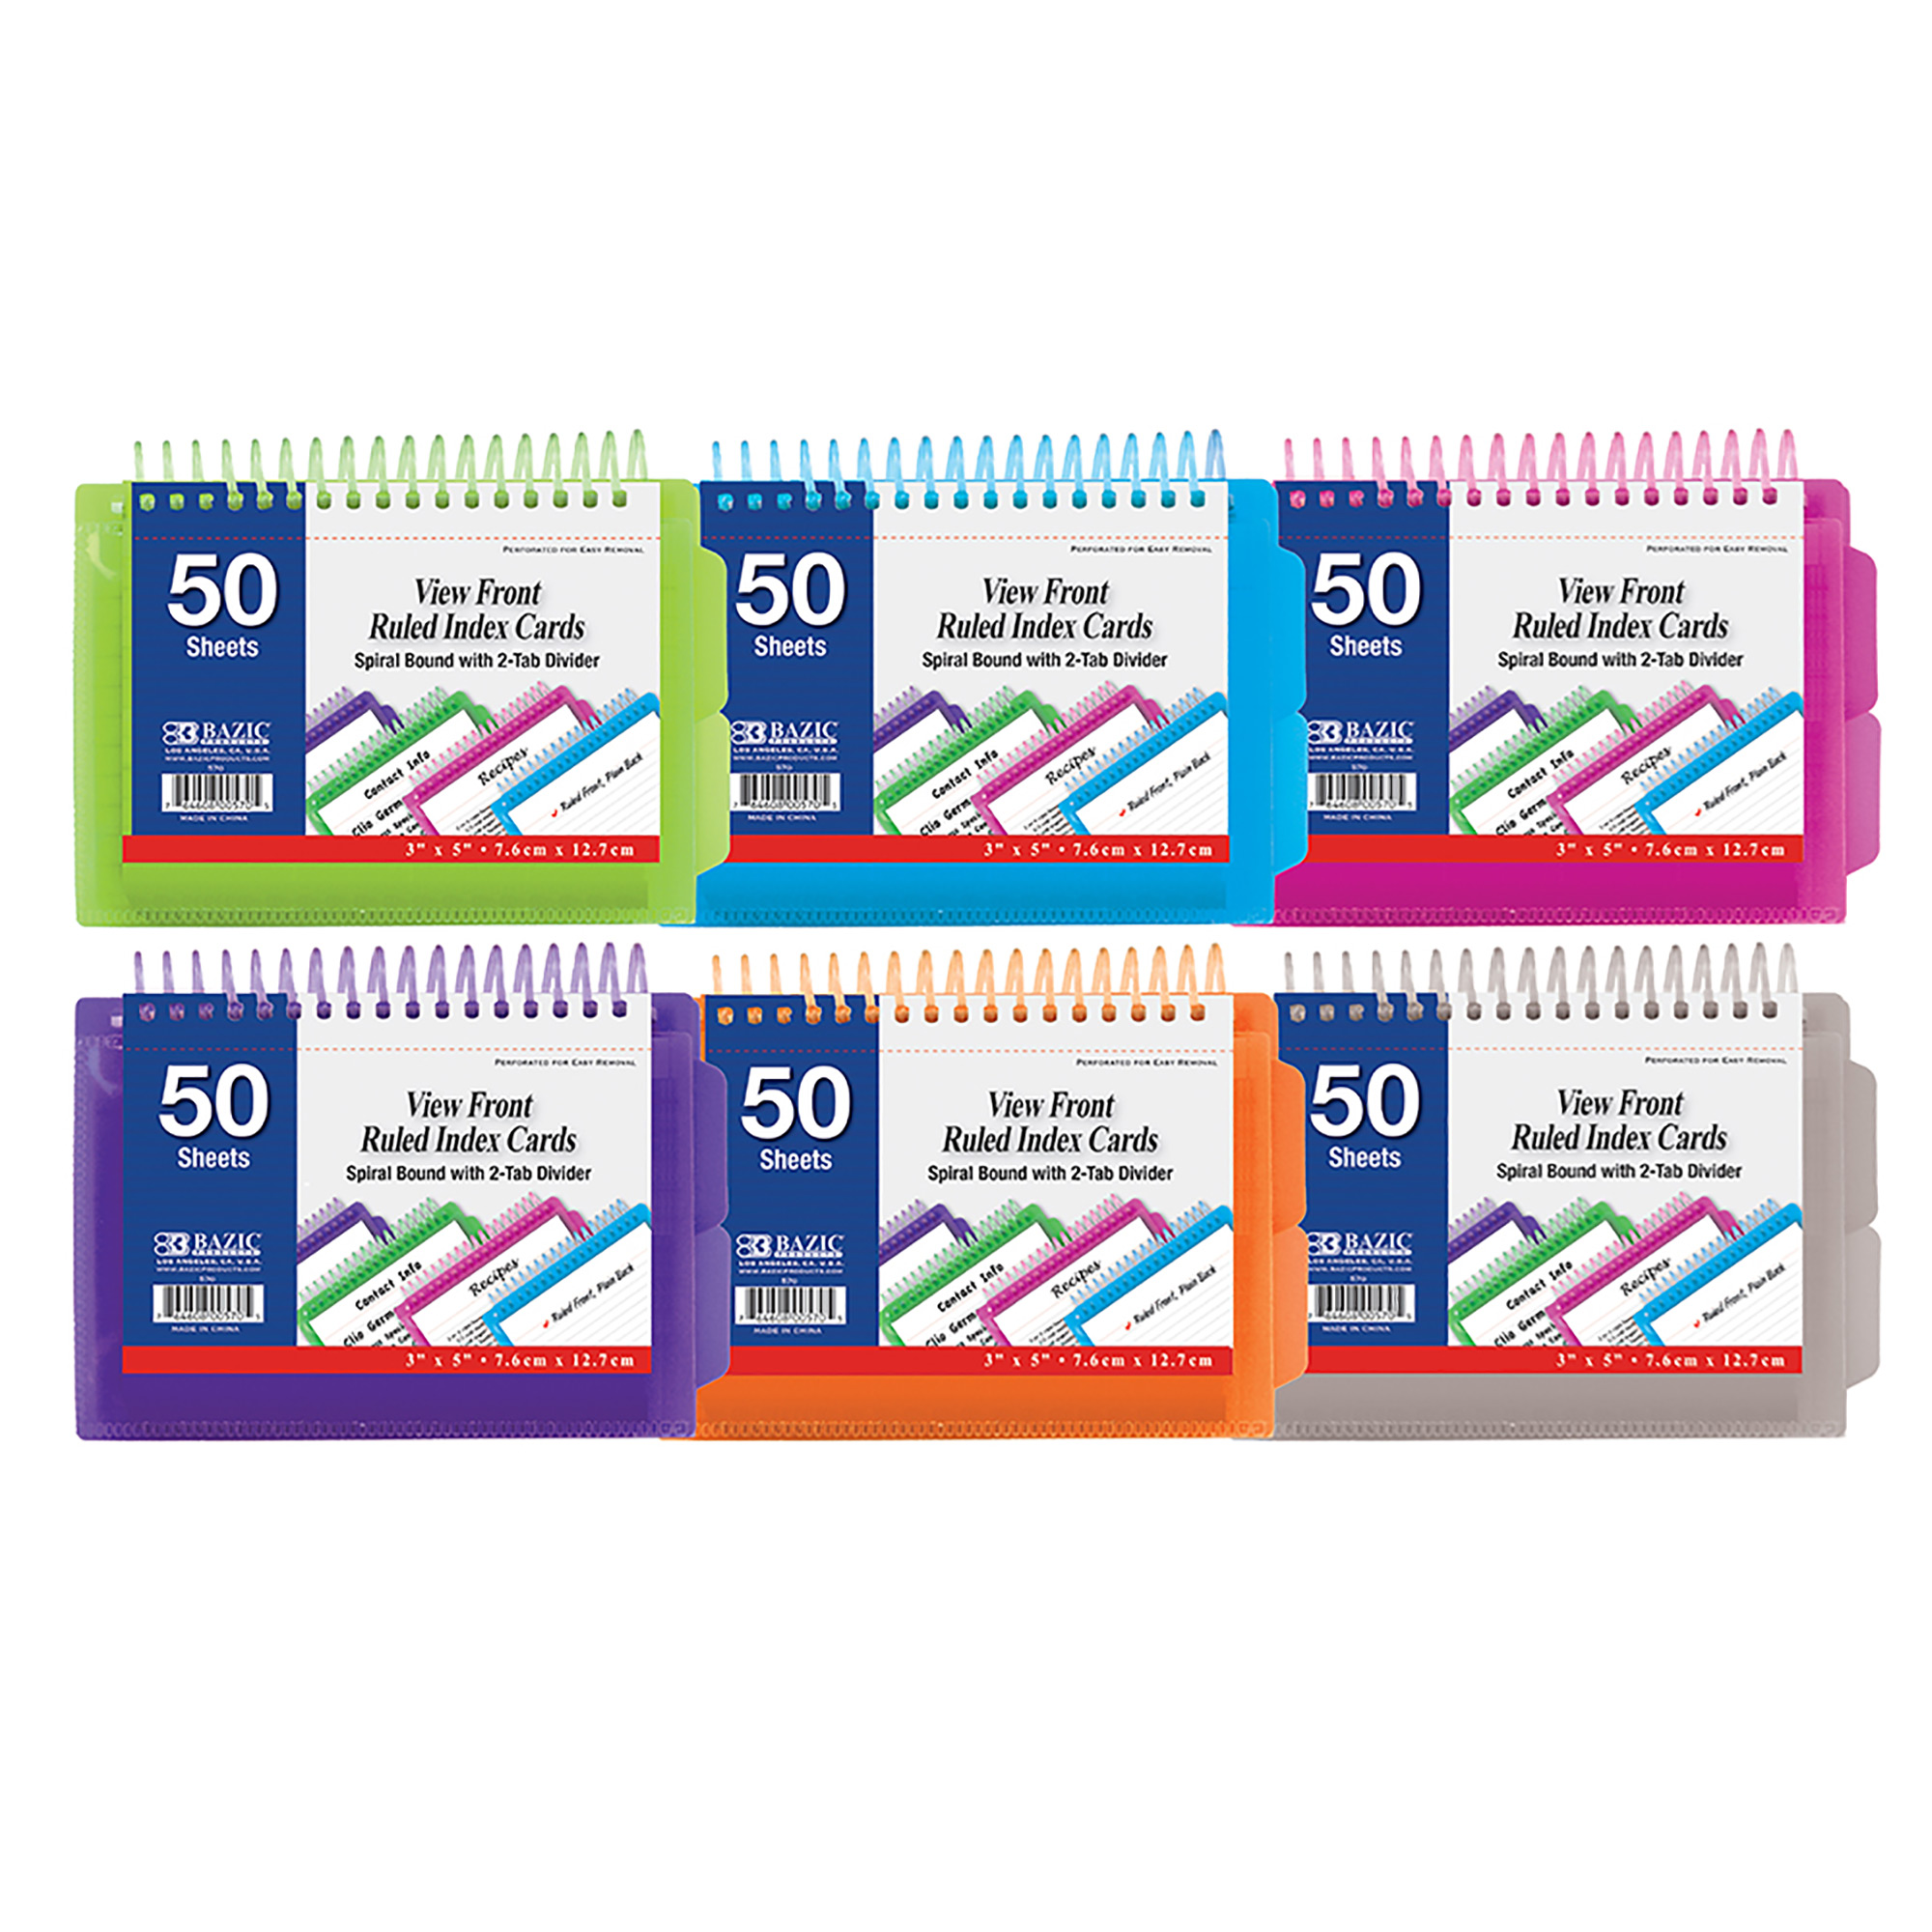 iQ Bold Index Cards and Tray